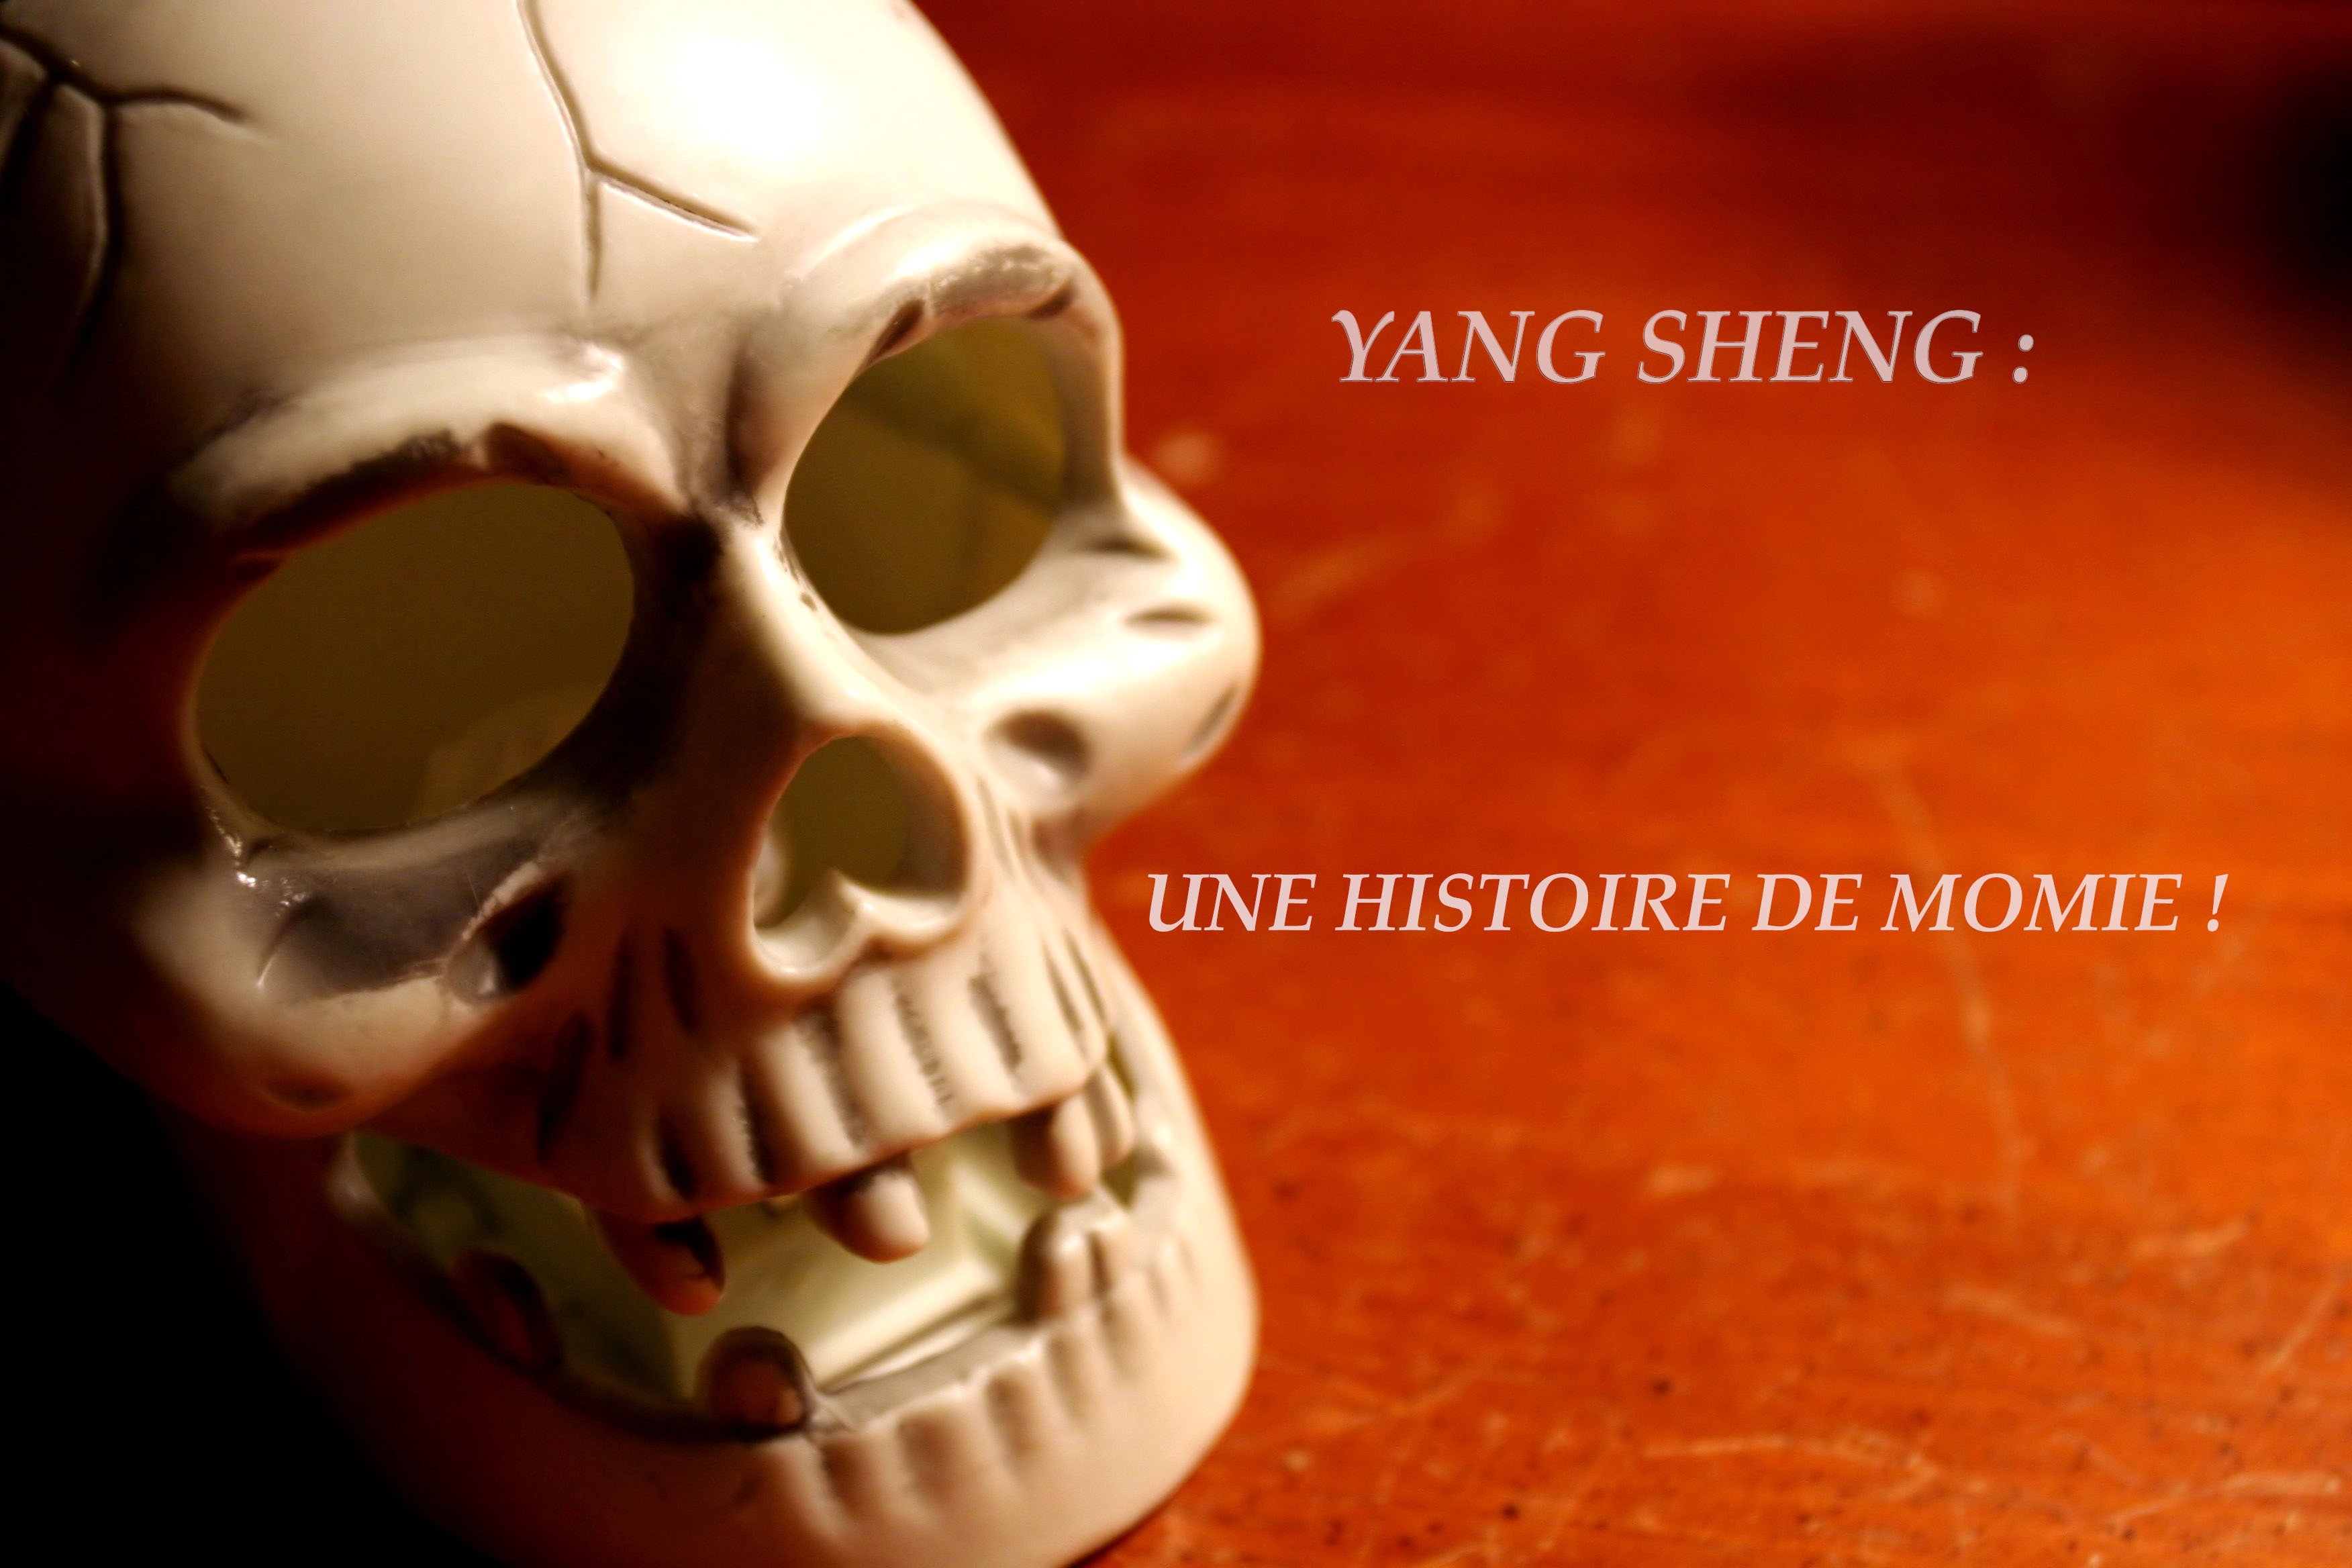 You are currently viewing YANG SHENG: UNE HISTOIRE DE MOMIE !